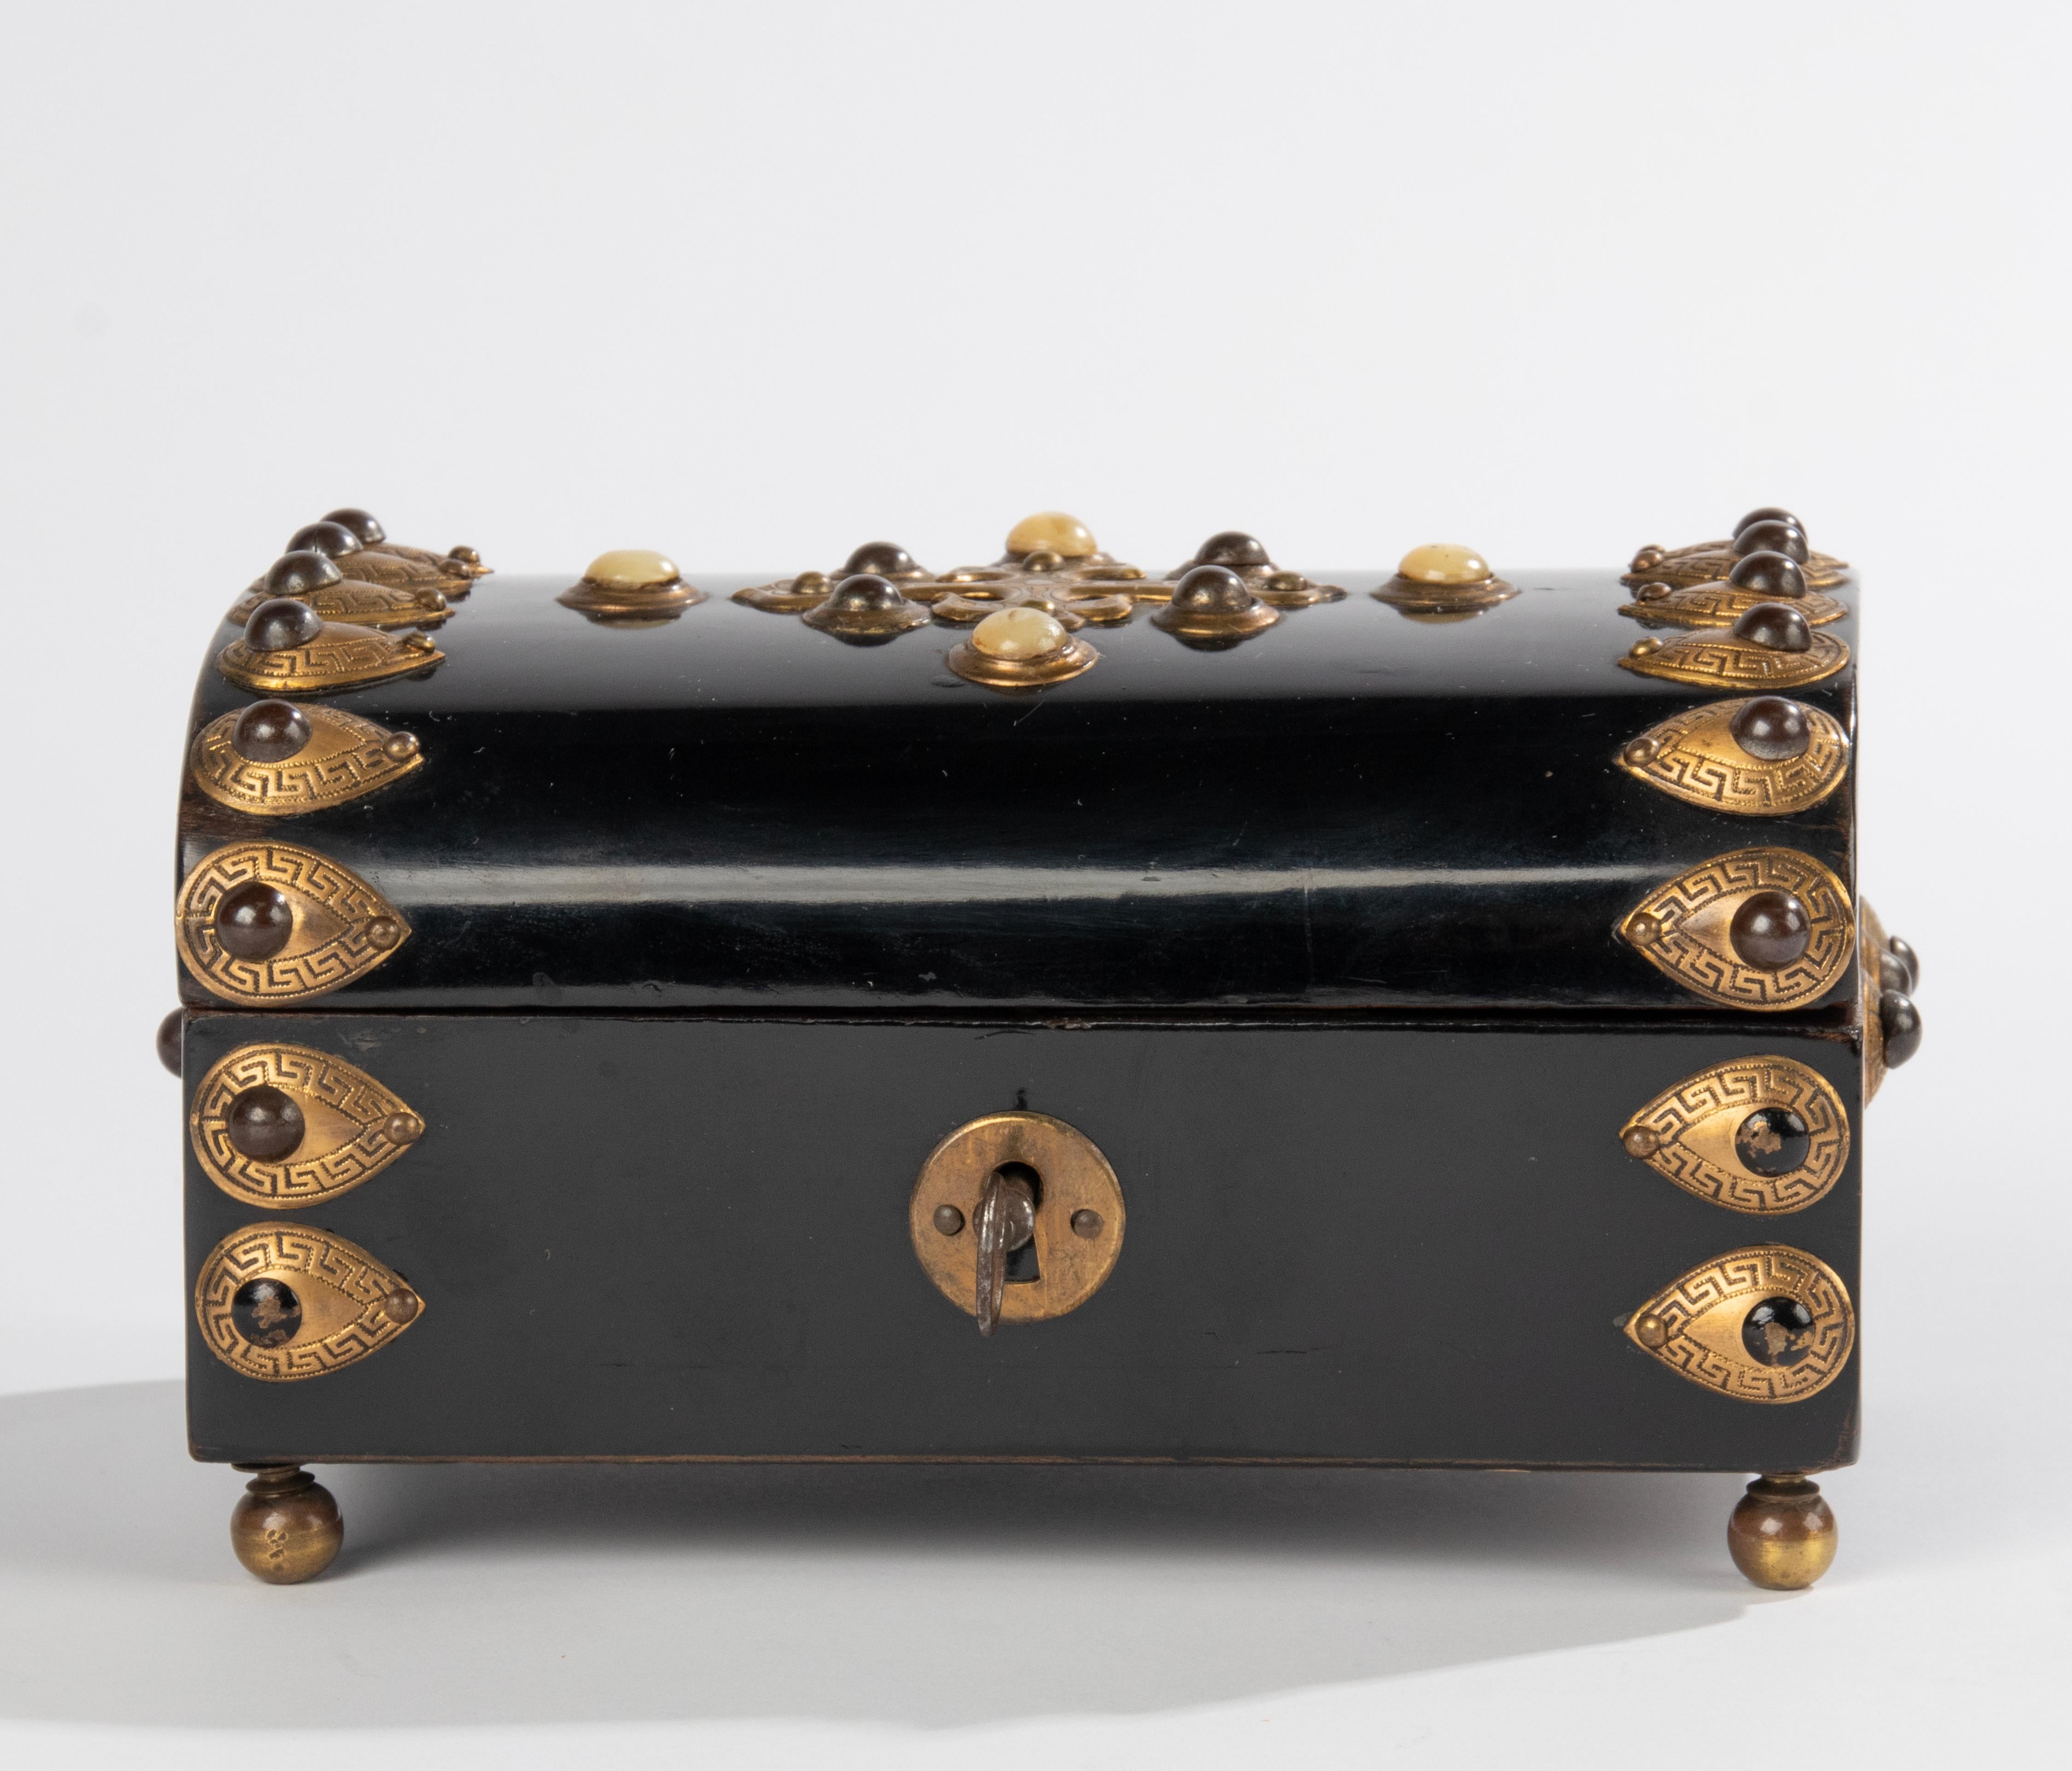 A beautiful antique decorative Napoleon III wooden box. Beautifully decorated with copper and bronze elements and round cut stones cut (tiger eye). The box is made of black lacquered wood (pine). Made in France, 1870-1890. In good condition. With a